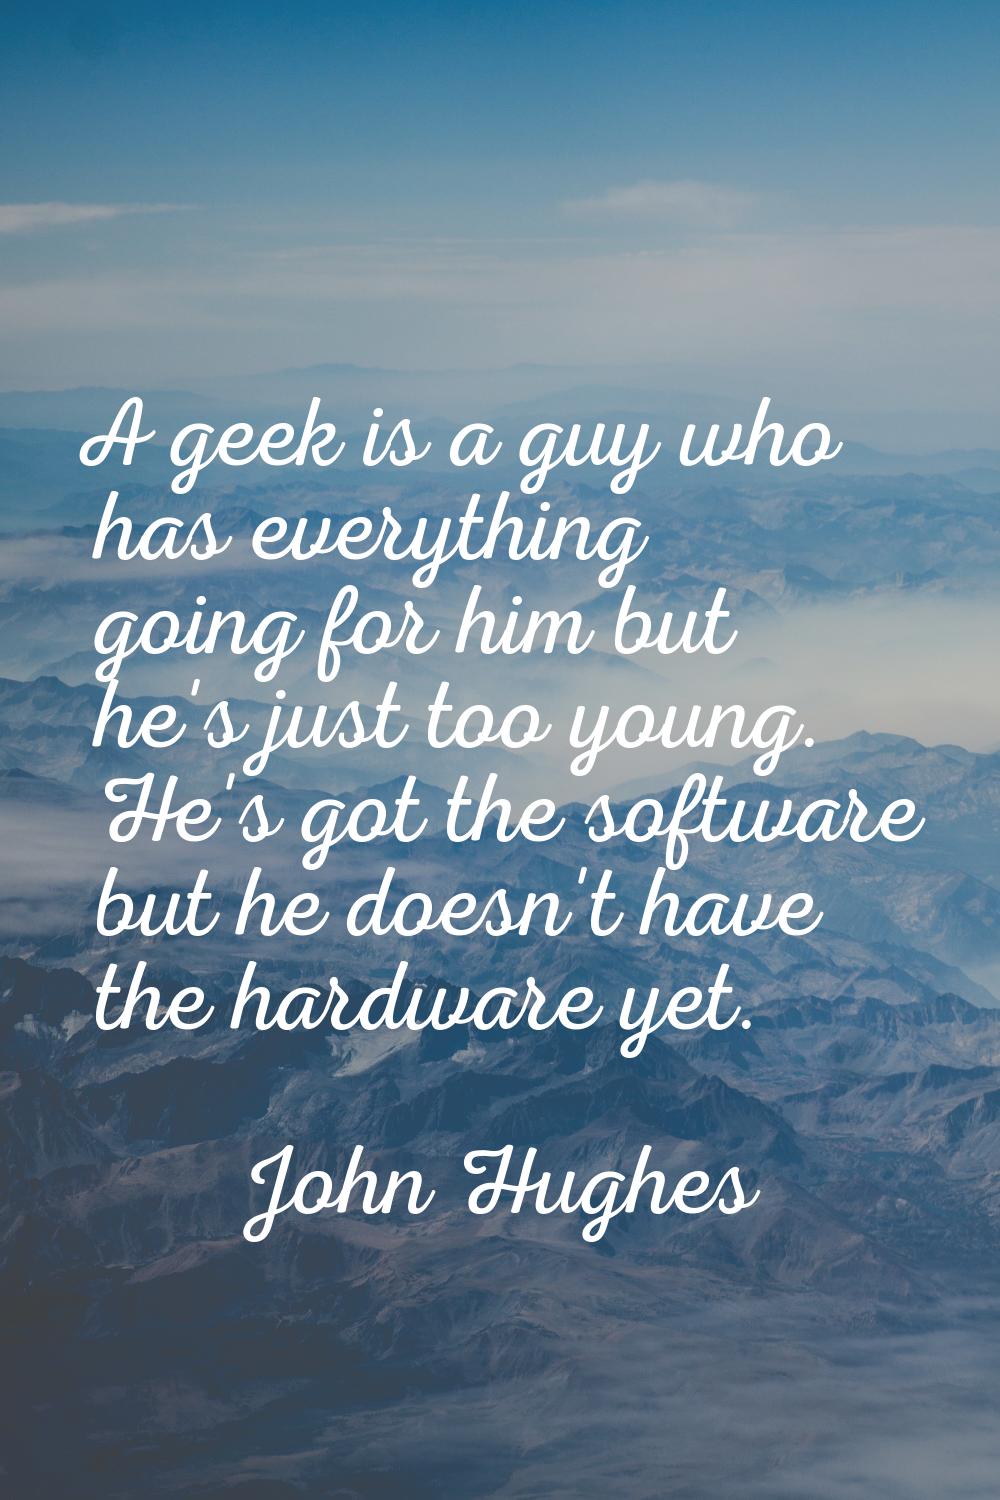 A geek is a guy who has everything going for him but he's just too young. He's got the software but